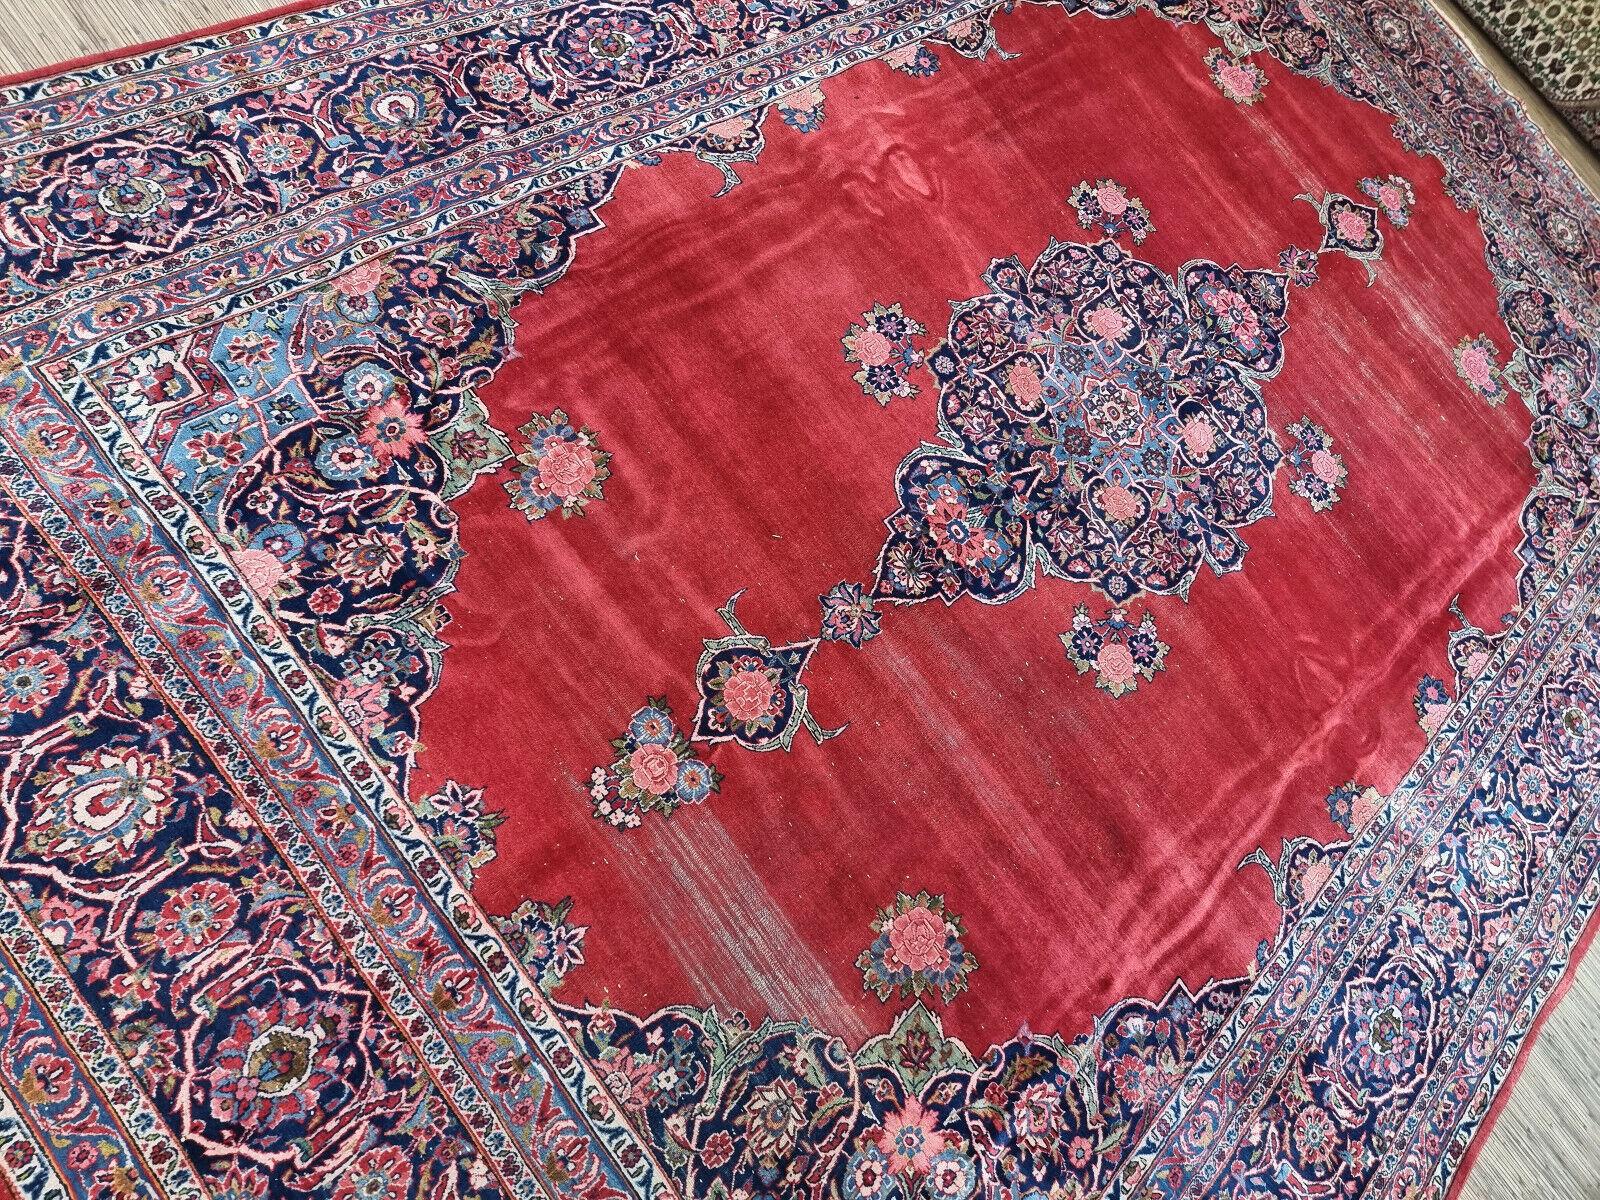 Handmade Antique Persian Style Kashan Distressed Rug 8.5' x 12.9', 1920s - 1D68 For Sale 6